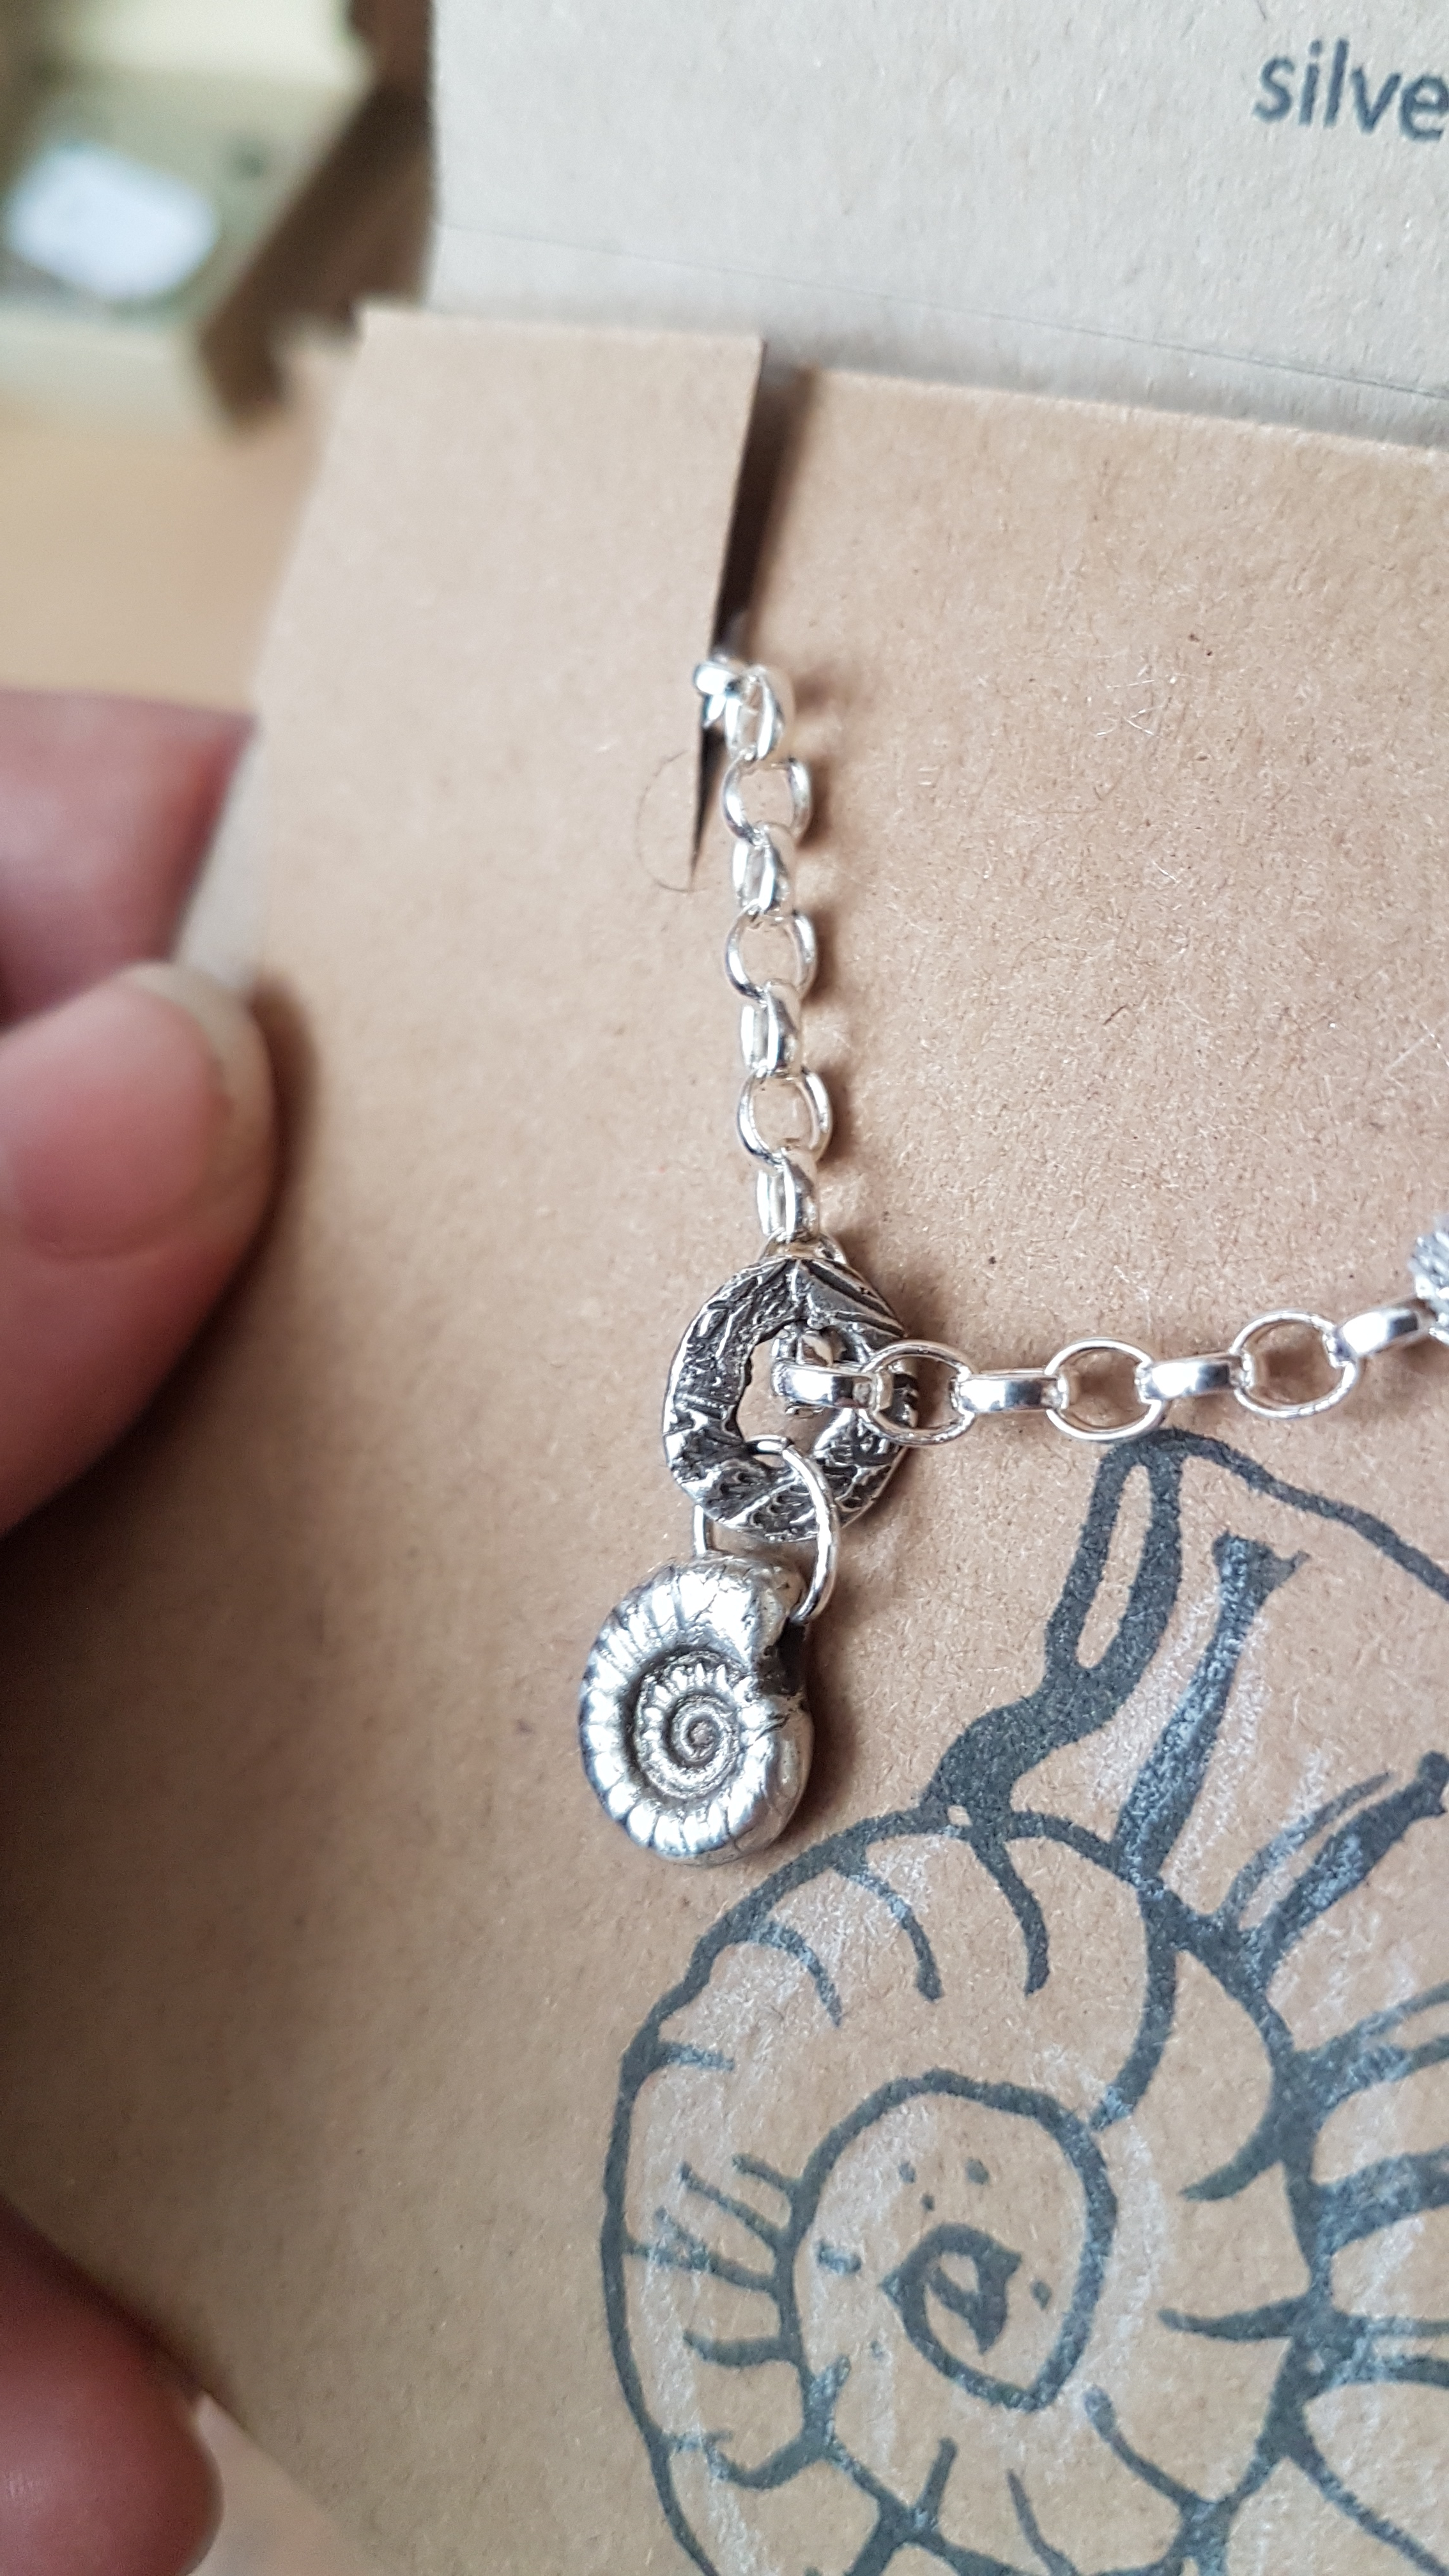 Fossil charm